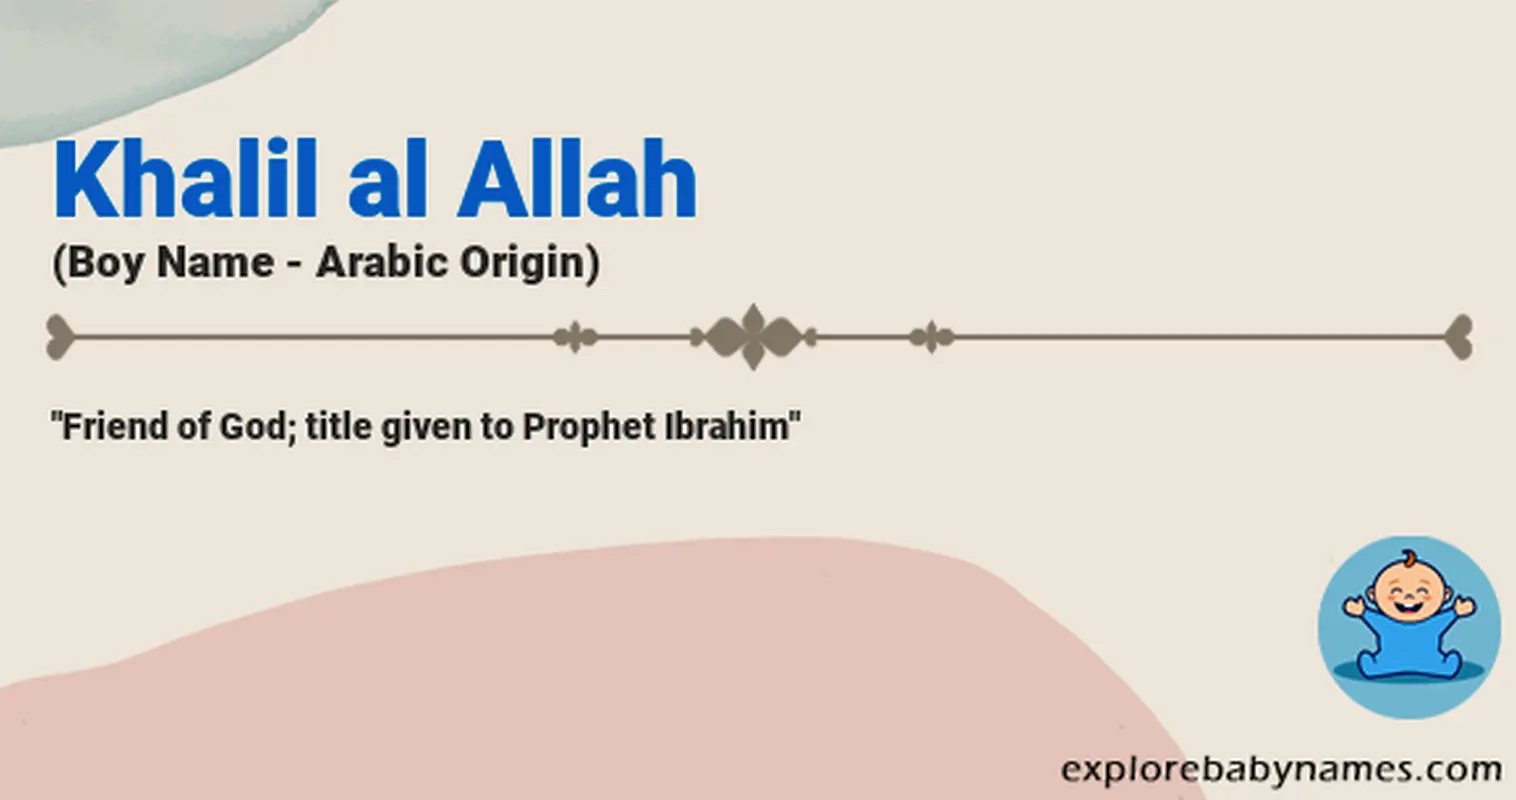 Meaning of Khalil al Allah